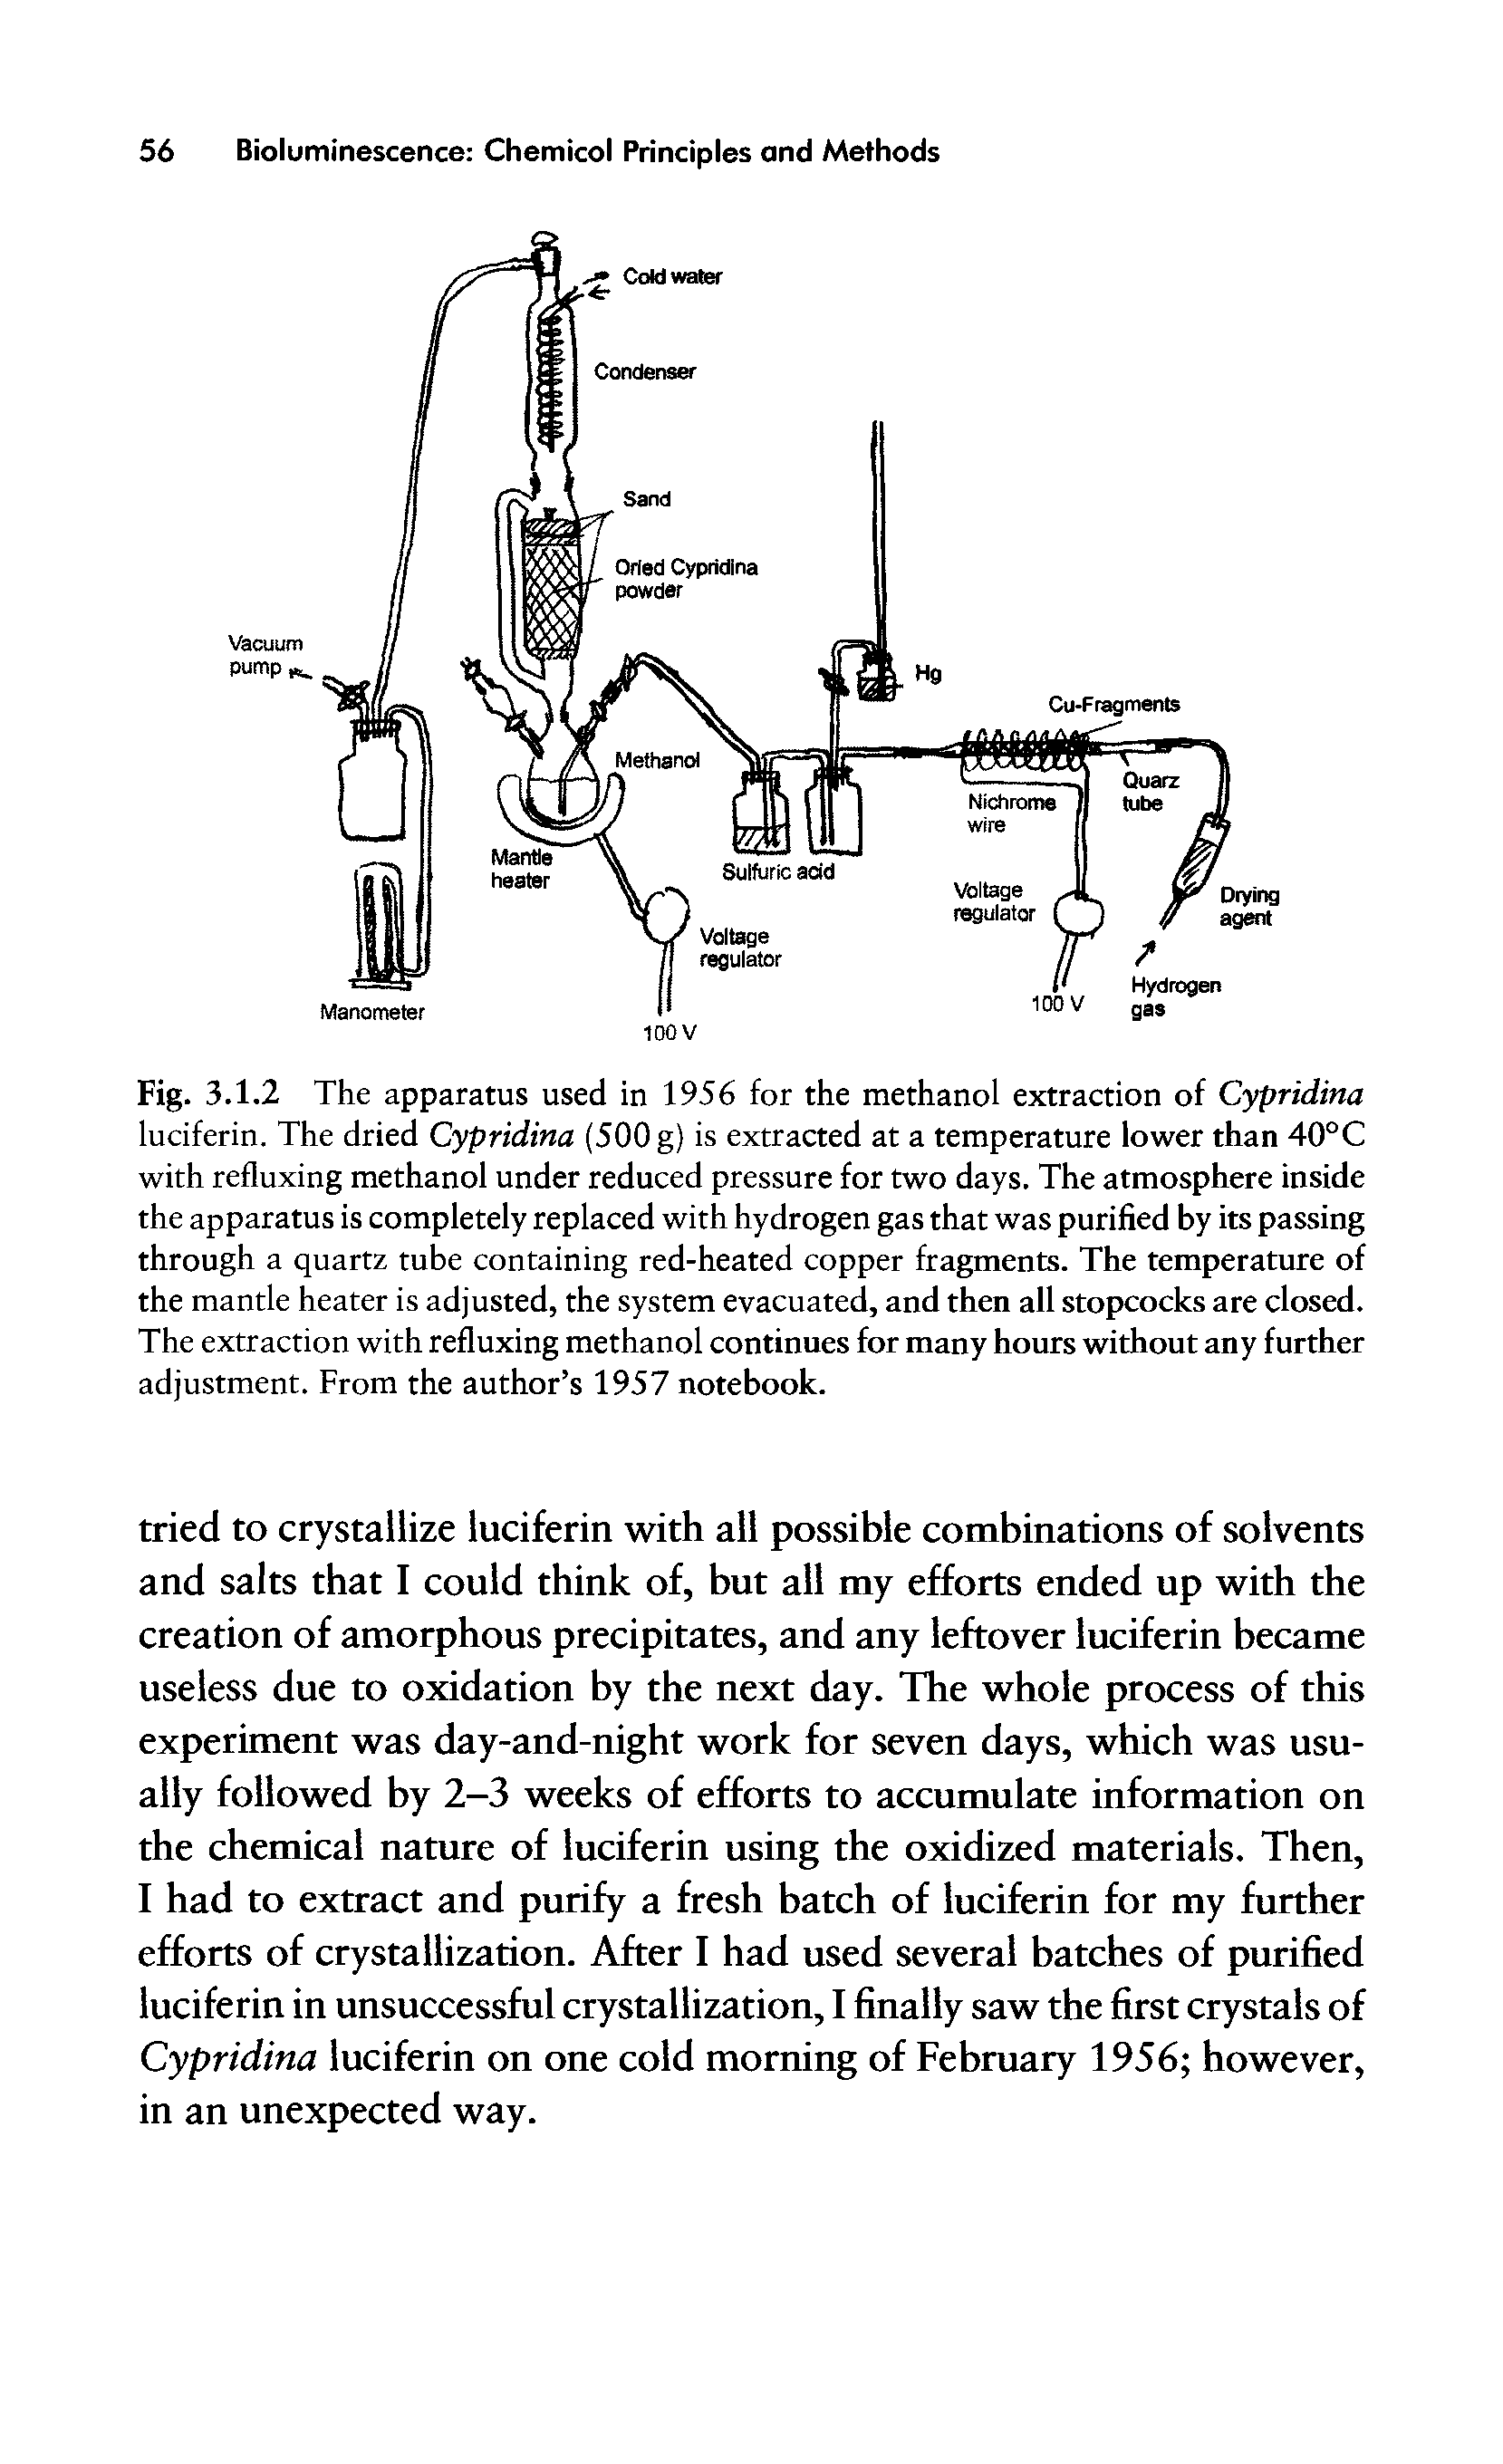 Fig. 3.1.2 The apparatus used in 1956 for the methanol extraction of Cypridina luciferin. The dried Cypridina (500 g) is extracted at a temperature lower than 40°C with refluxing methanol under reduced pressure for two days. The atmosphere inside the apparatus is completely replaced with hydrogen gas that was purified by its passing through a quartz tube containing red-heated copper fragments. The temperature of the mantle heater is adjusted, the system evacuated, and then all stopcocks are closed. The extraction with refluxing methanol continues for many hours without any further adjustment. From the author s 1957 notebook.